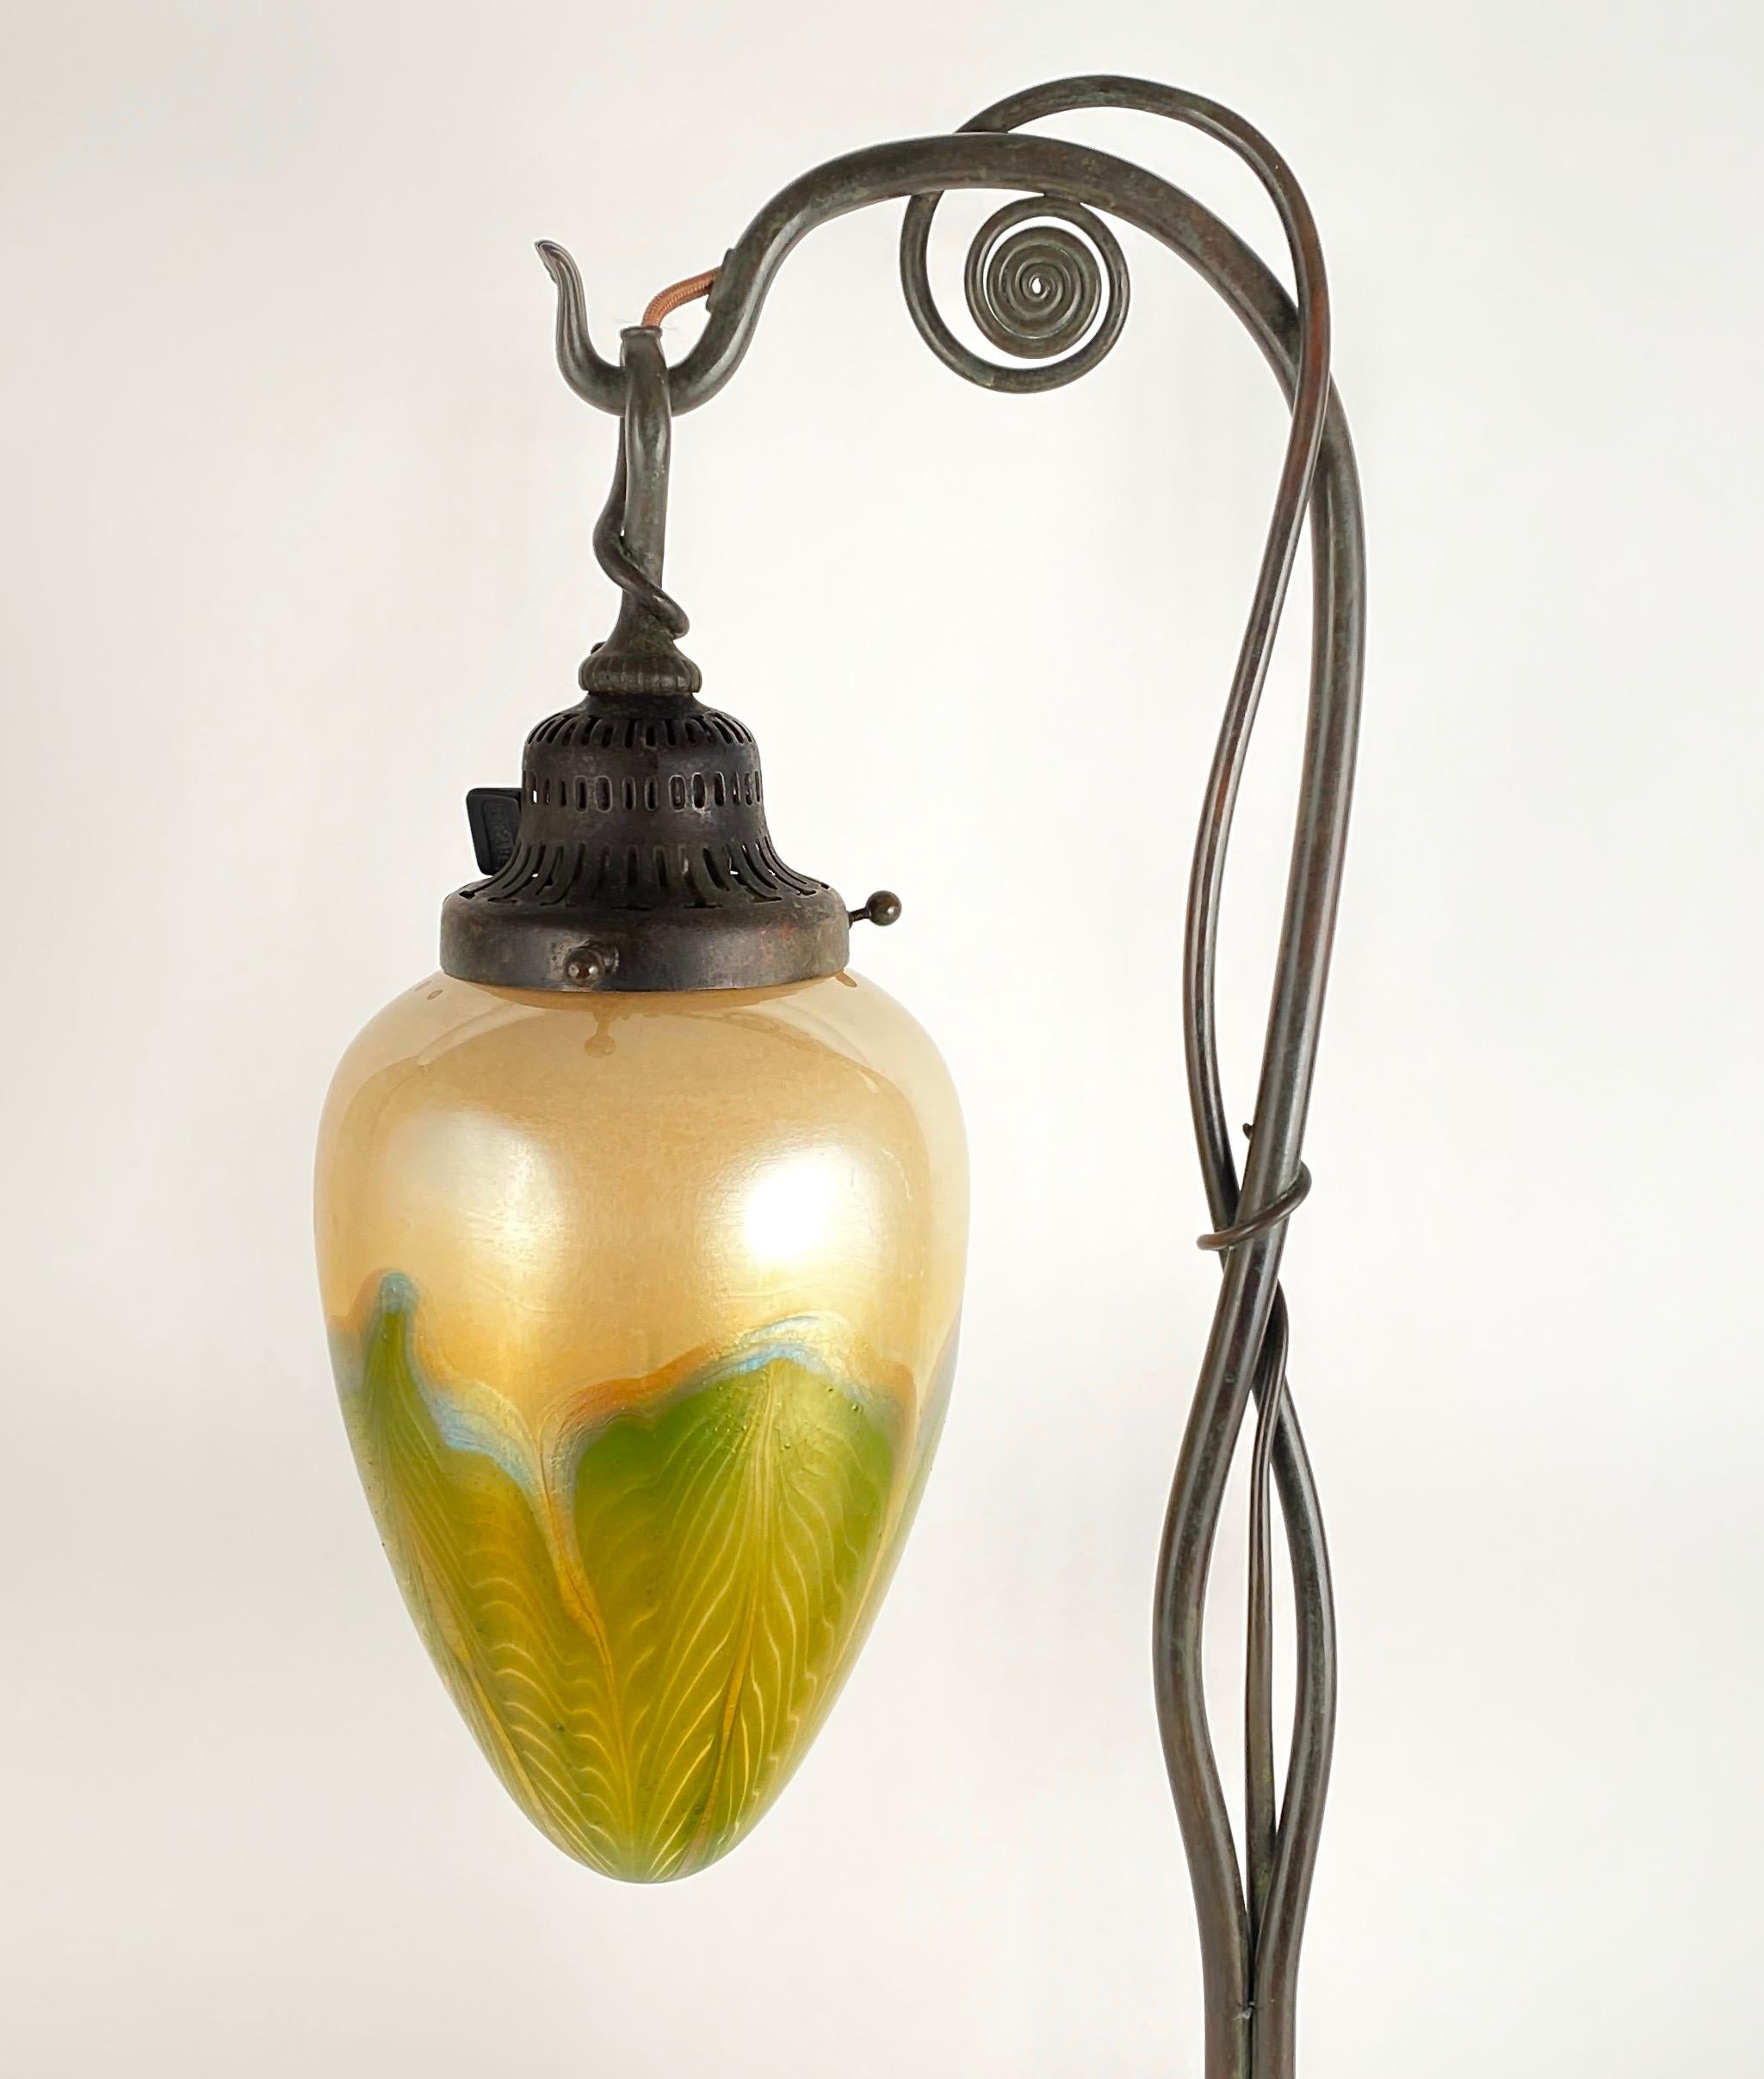 Hand-Crafted American Art Nouveau Table Lamp by, Tiffany Studios, circa 1905